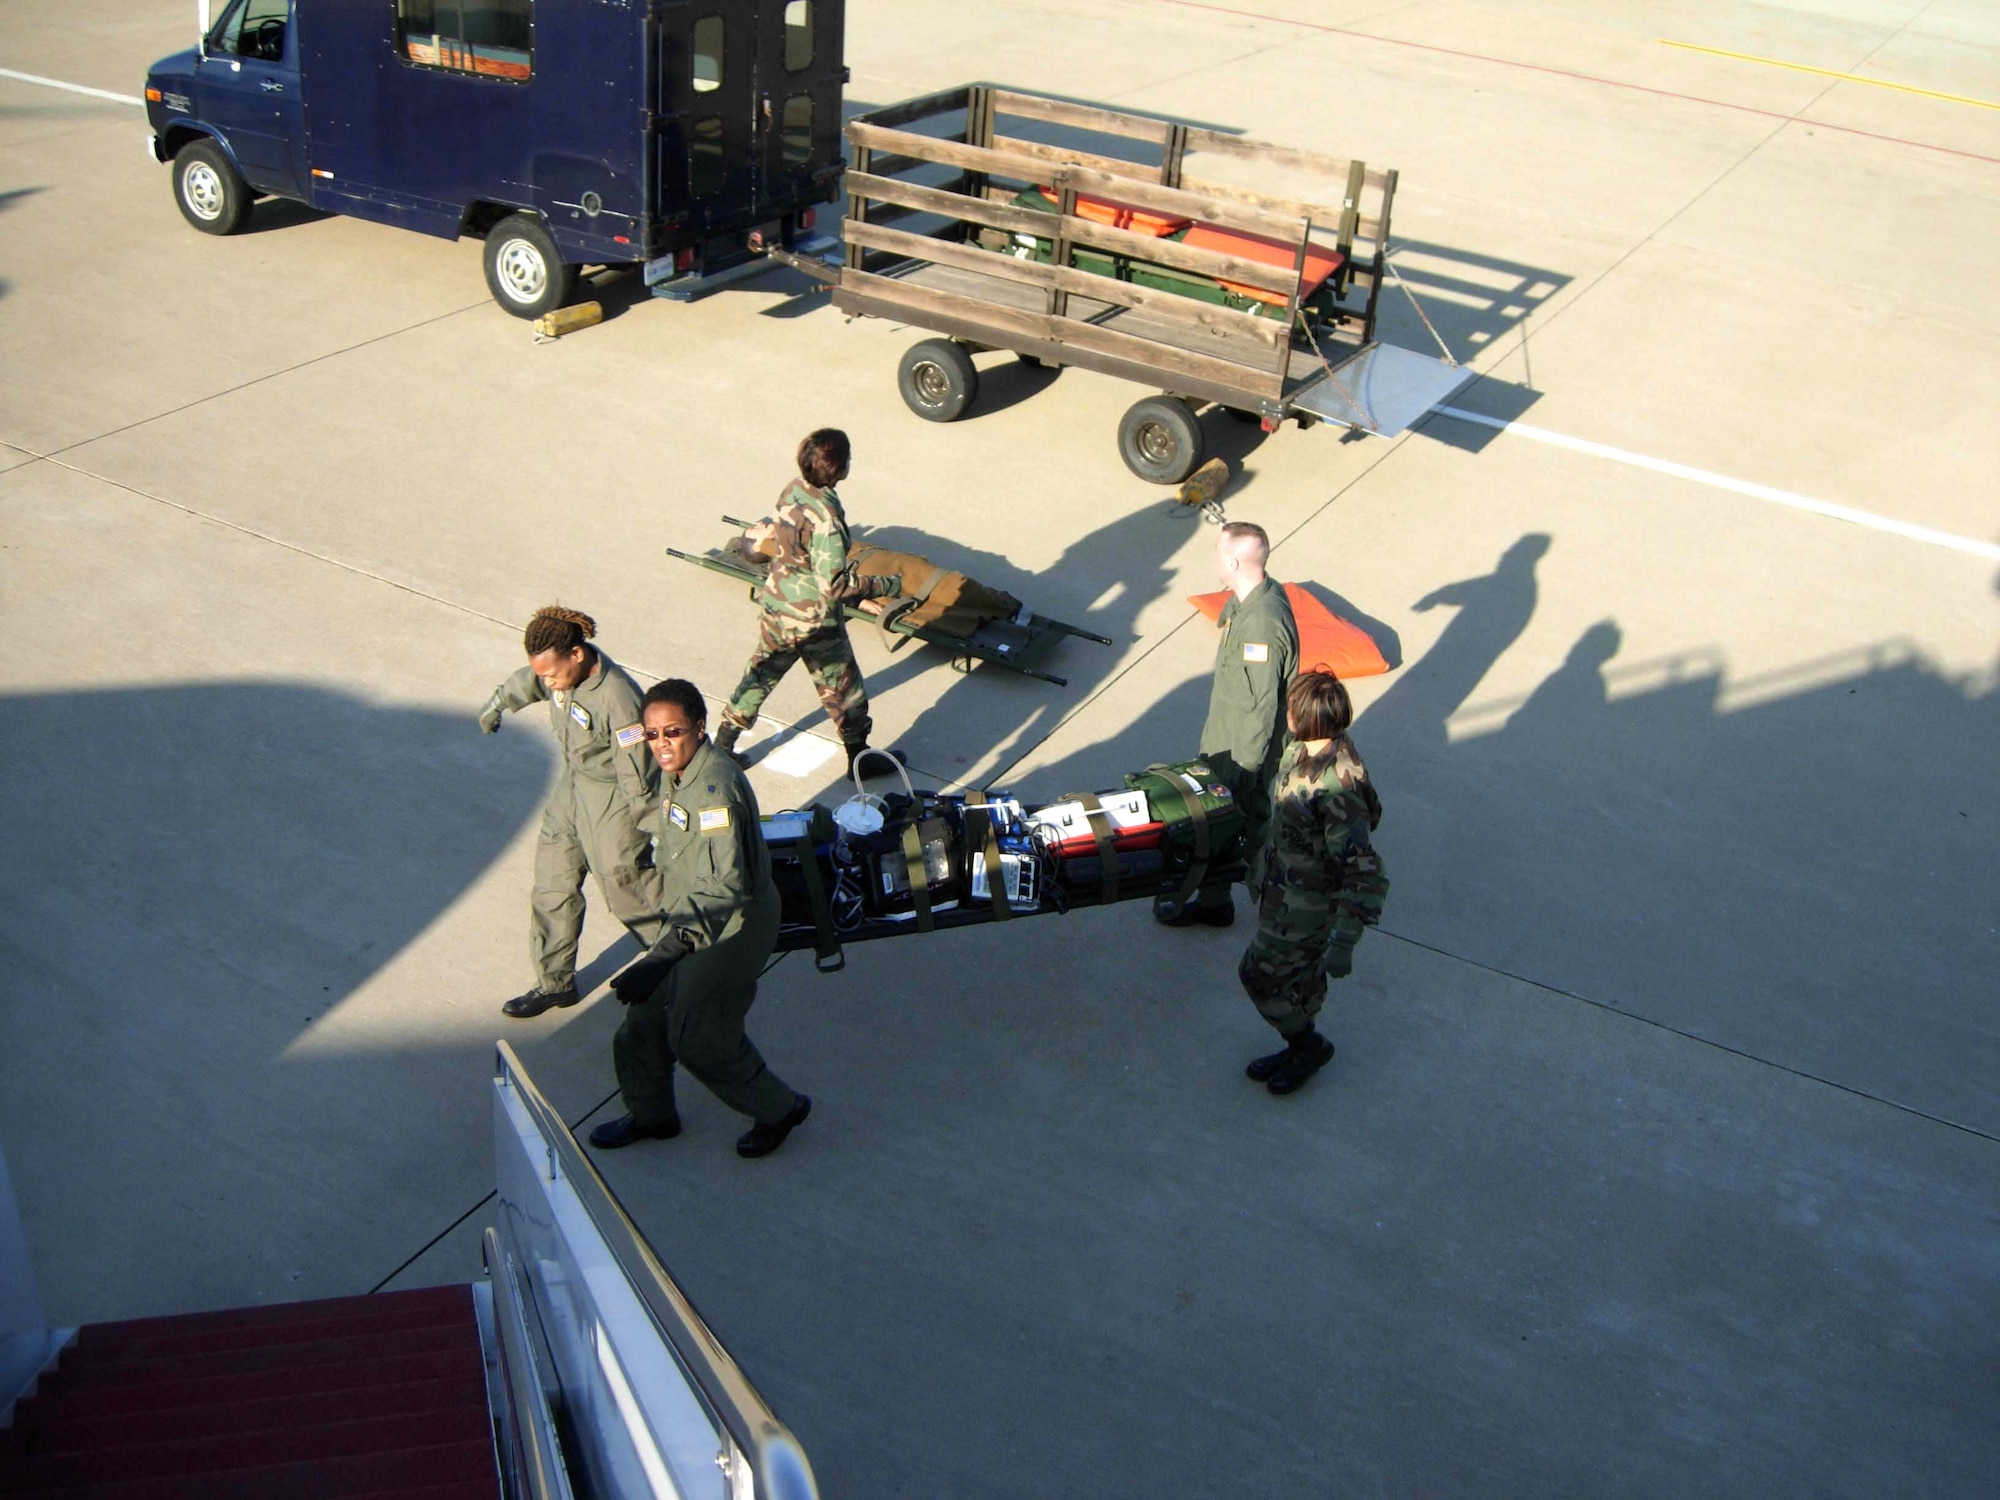 ANDREWS AIR FORCE BASE, Md. -- Members of the 459th Aeromedical Evacuation Squadron load litters of medical equipment in preparation for their training flight to St. Croix, U.S. Virgin Islands April 18. Ten members of the 439th AES joined 459th AES members in a blended training mission to the island. Mission training expanded beyond the medical realm to include air refueling and an overseas sortie. (U.S. Air Force photo/Staff Sgt. Amaani Lyle)